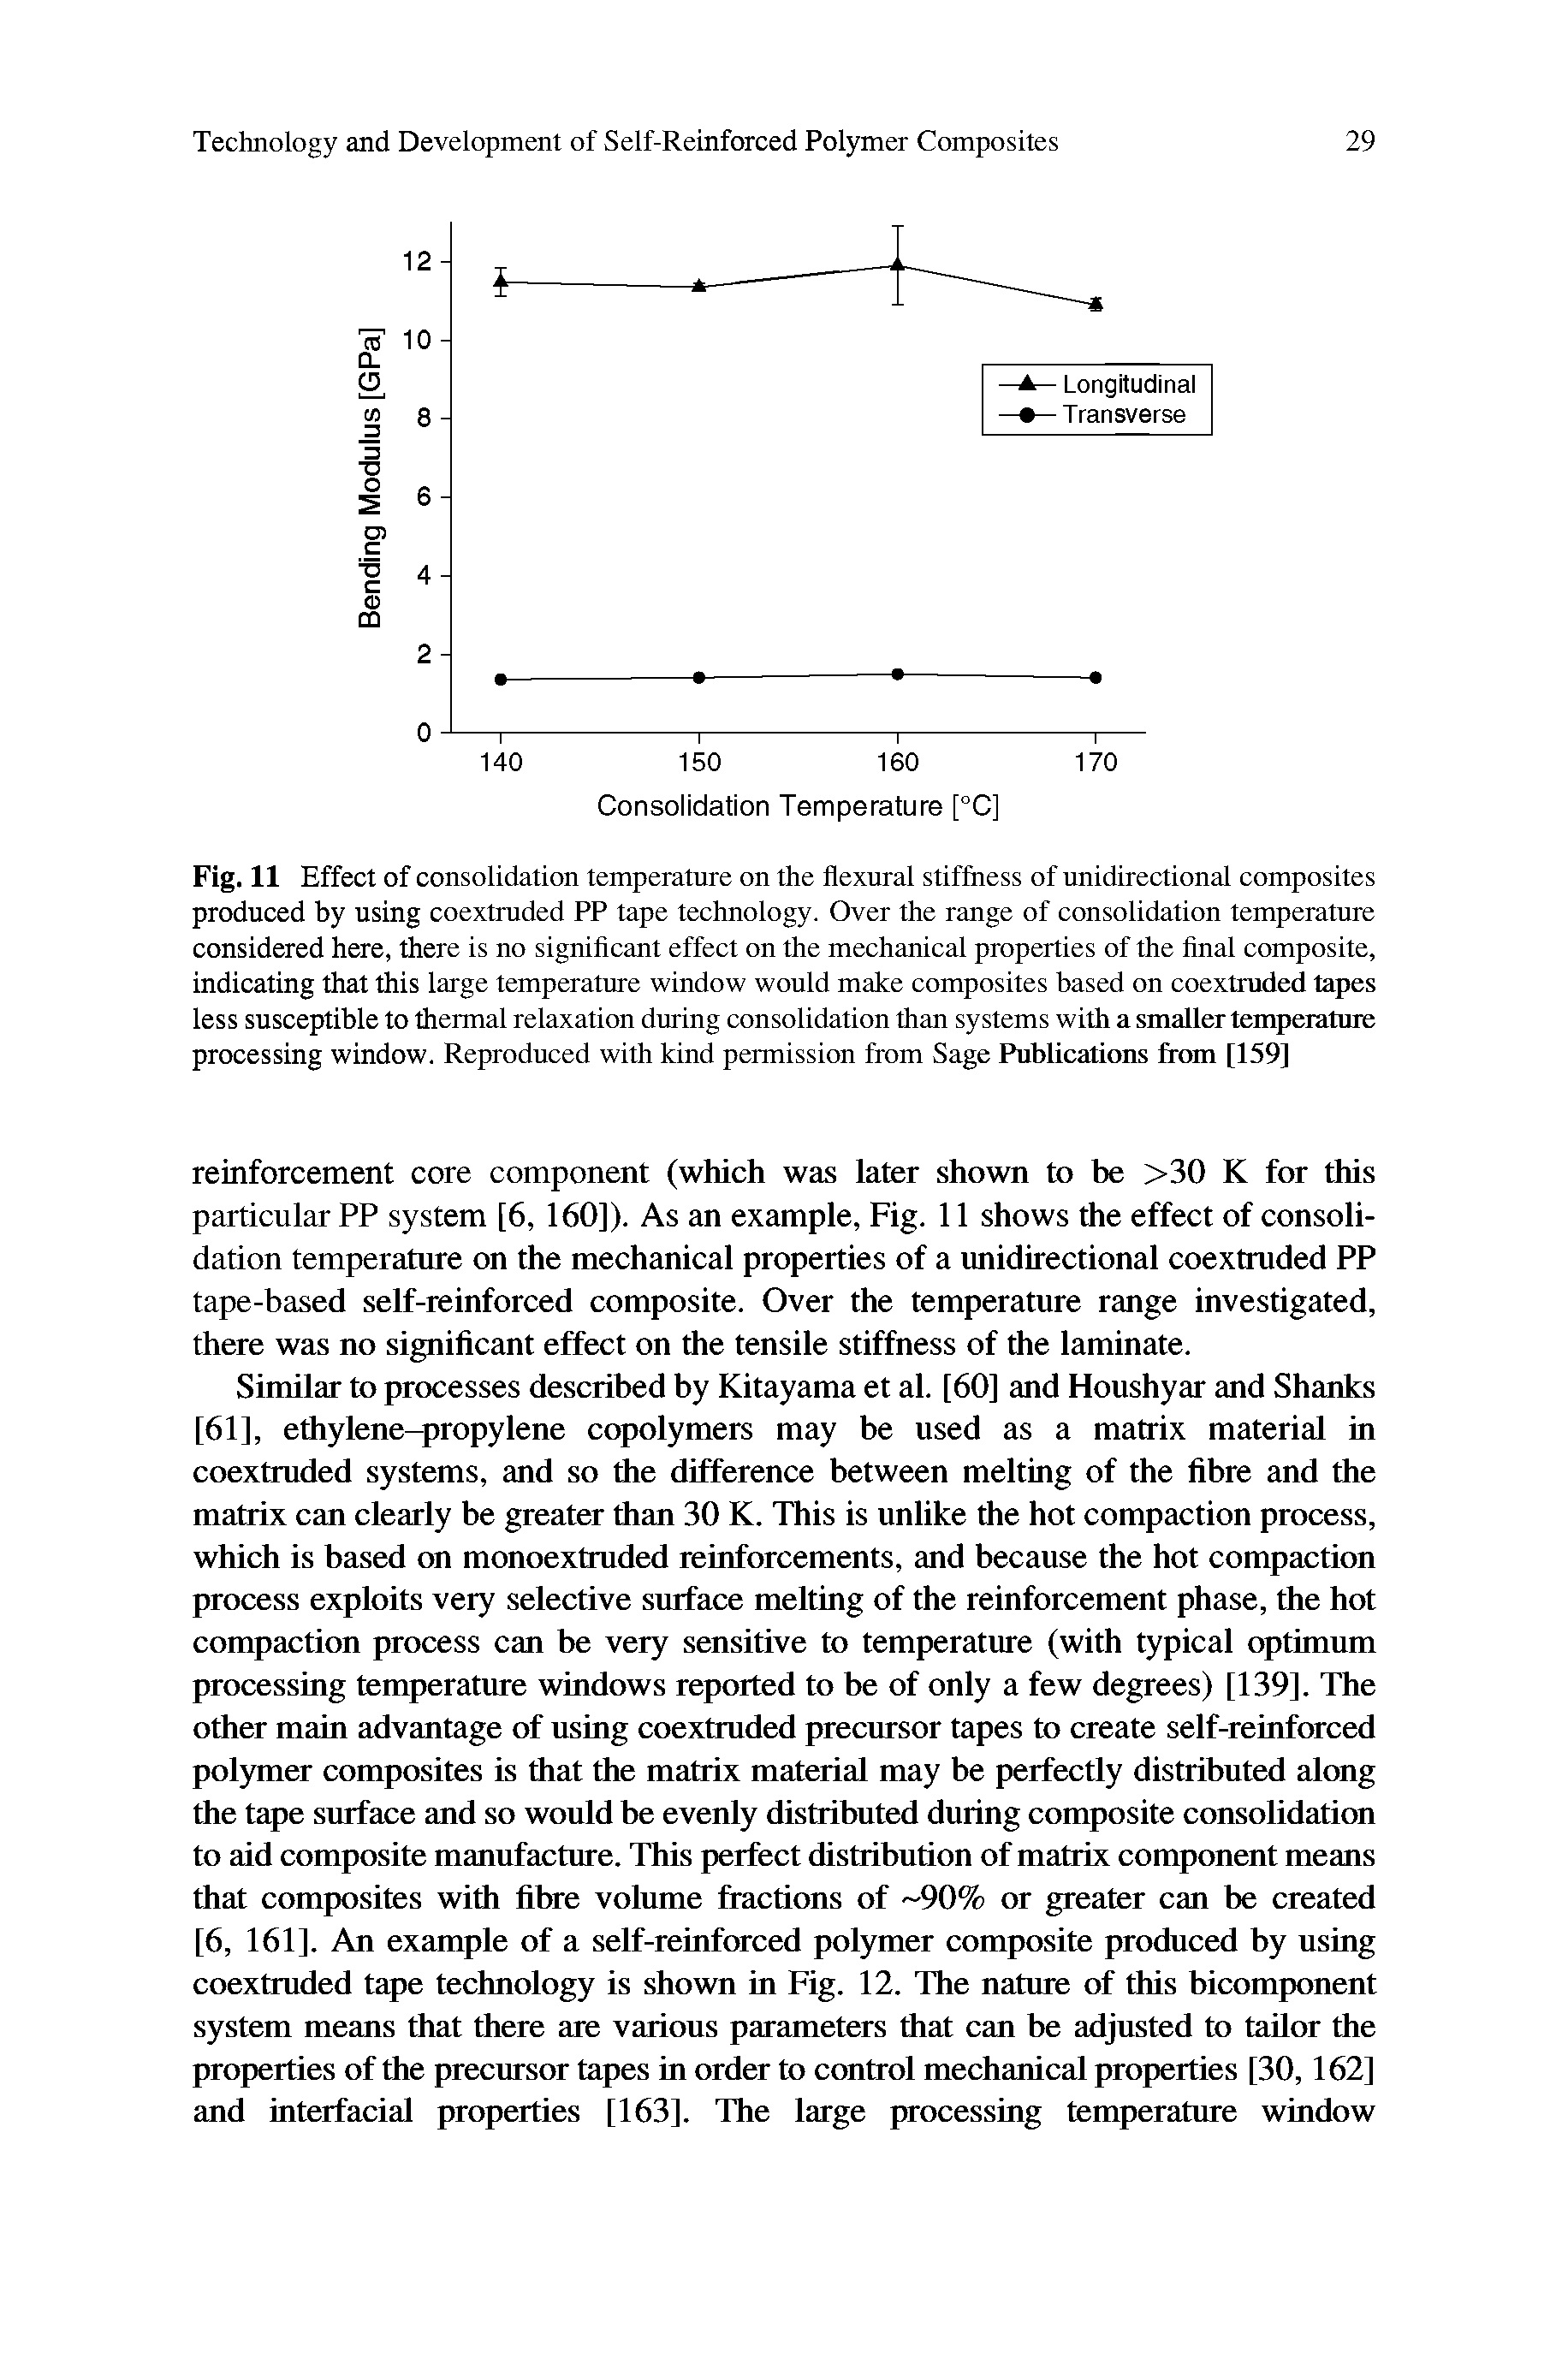 Fig. 11 Effect of consolidation temperature on the flexural stiffness of unidirectional composites produced by using coextruded PP tape technology. Over the range of consolidation temperature considered here, there is no significant effect on the mechanical properties of the final composite, indicating that this large temperature window would make composites based on coextruded tapes less susceptible to thermal relaxation during consolidation than systems with a smaller temperature processing window. Reproduced with kind permission from Sage Publieatioiis frran [159]...